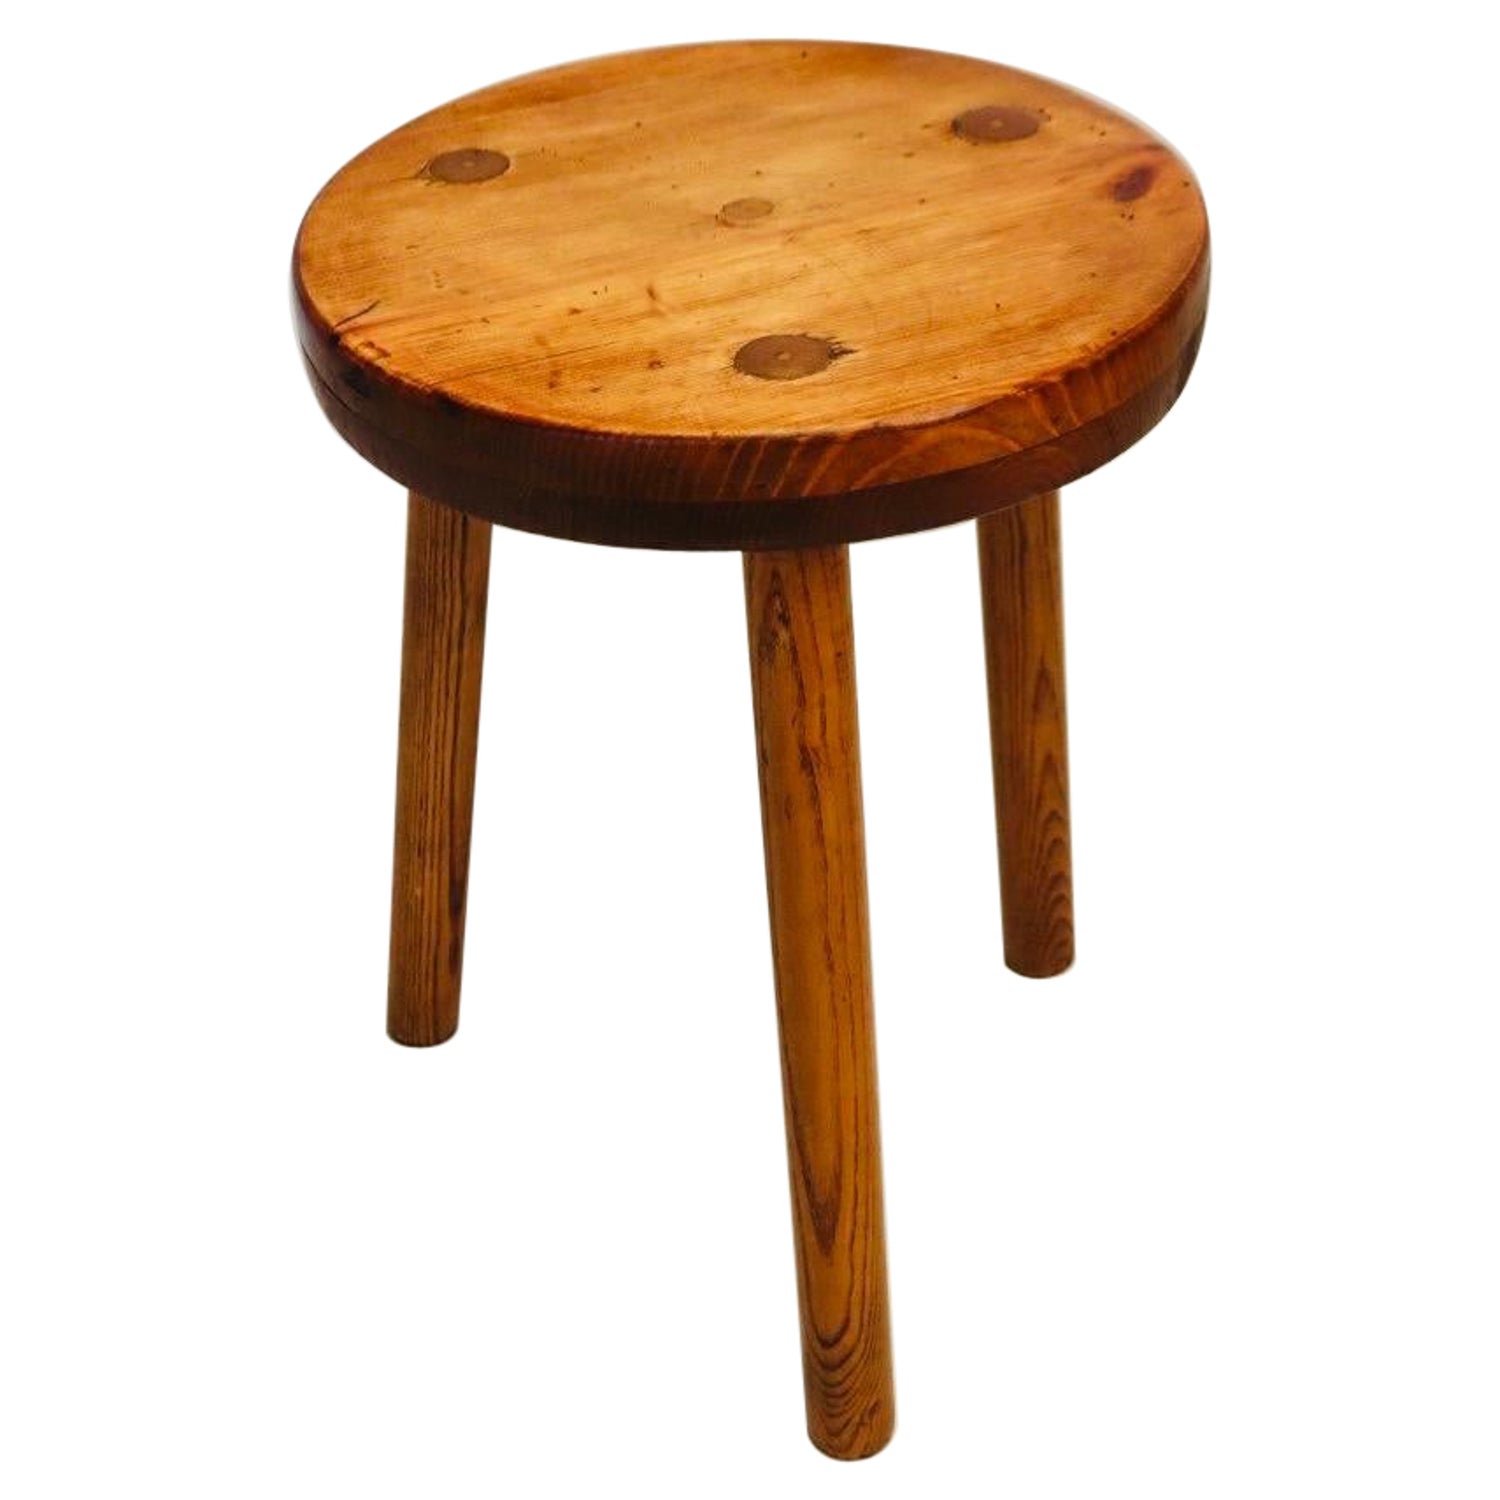 Charlotte Perriand Style Oak Brutalist Stool For Sale at 1stDibs